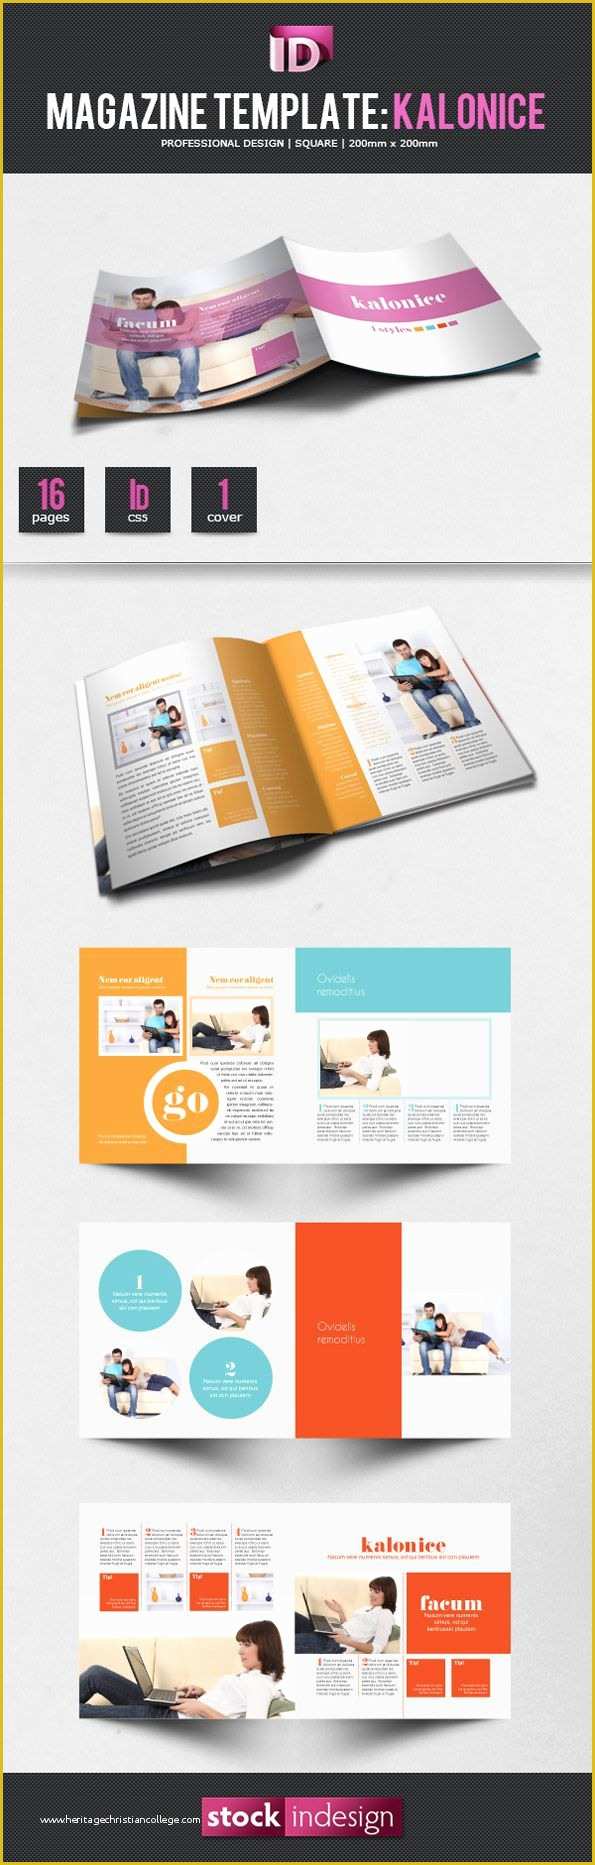 Template Indesign Free Of Free Indesign Magazine Template Kalonice